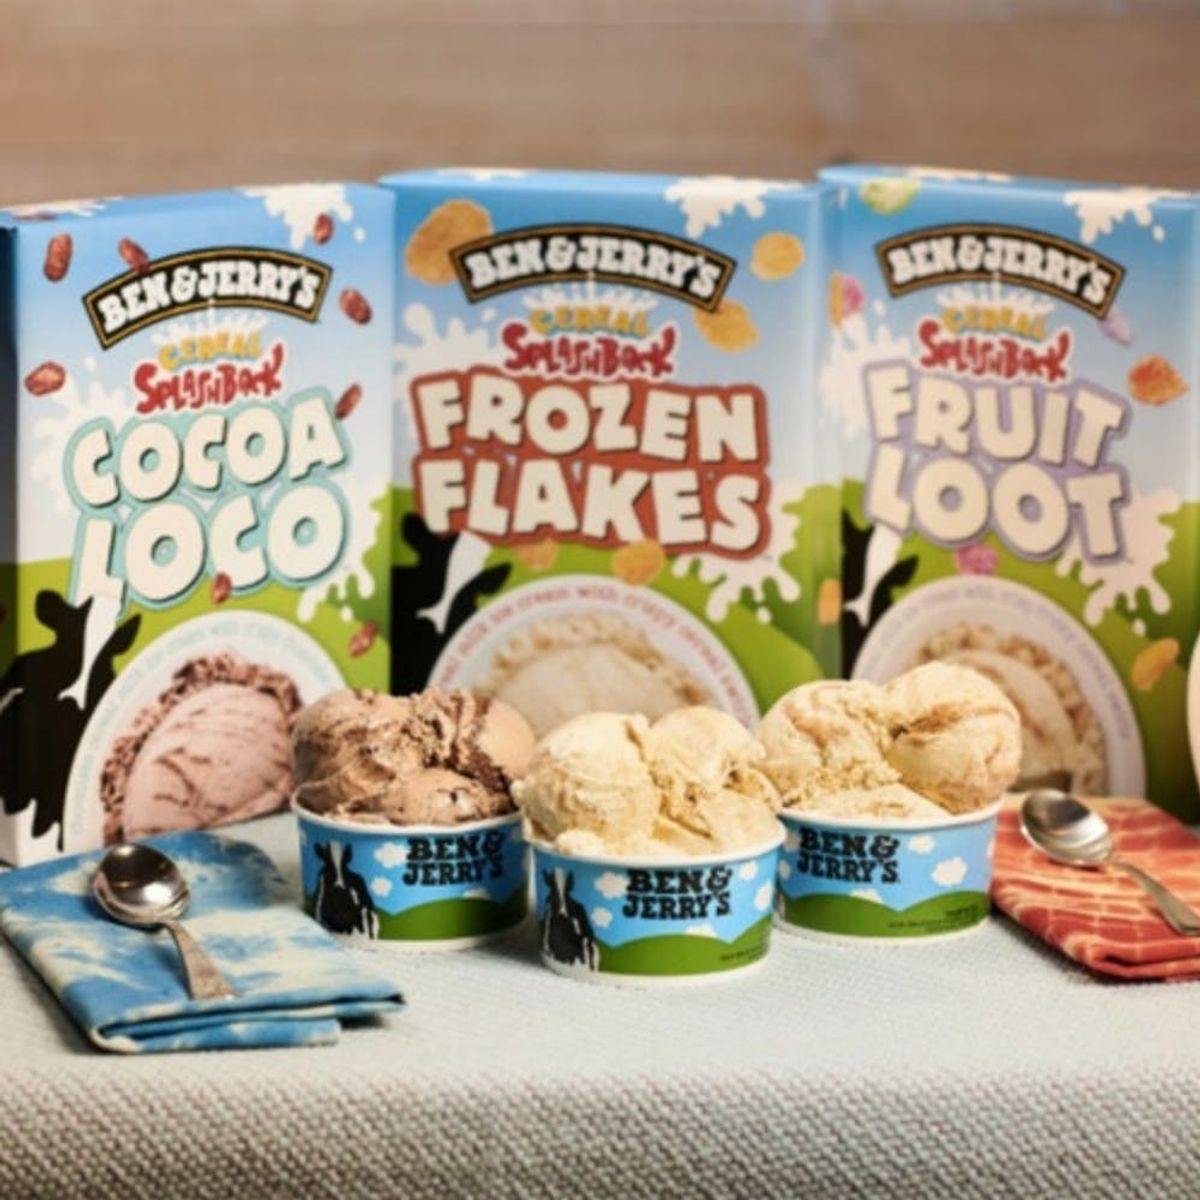 Ben & Jerry’s Three New Cereal-Inspired Flavors Mean You Can Have Dessert for Breakfast